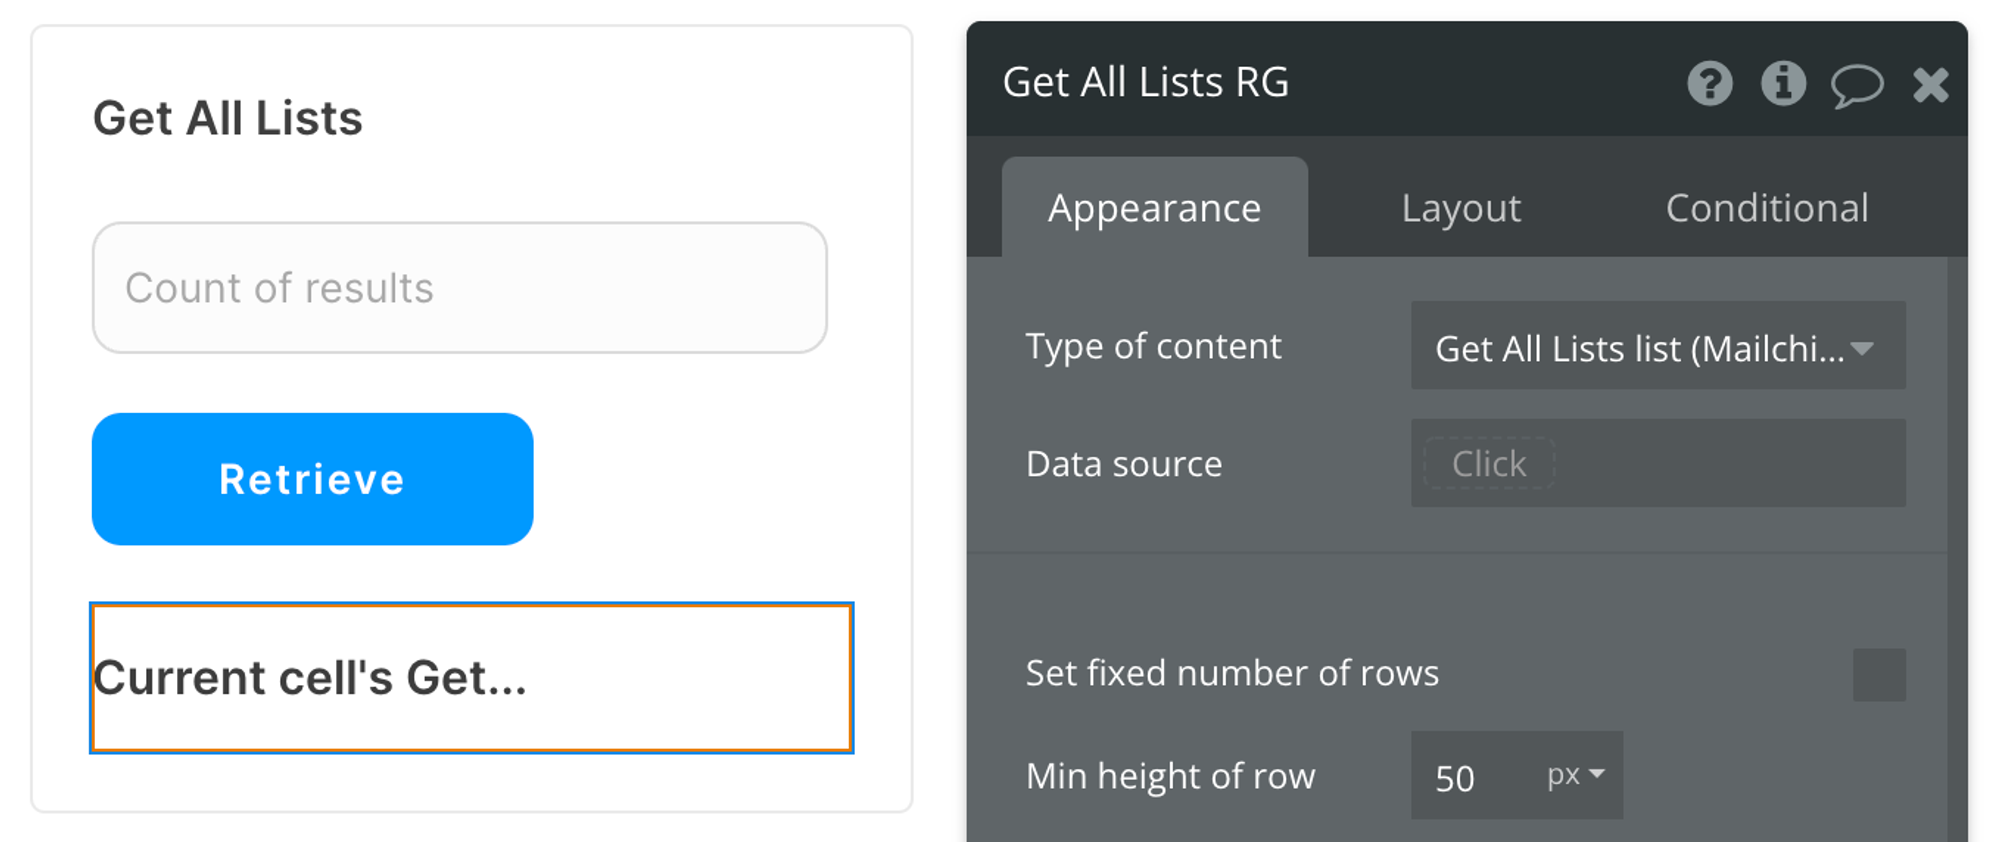 Select Get All Lists list (Mailchimp Extended) from the list of content types